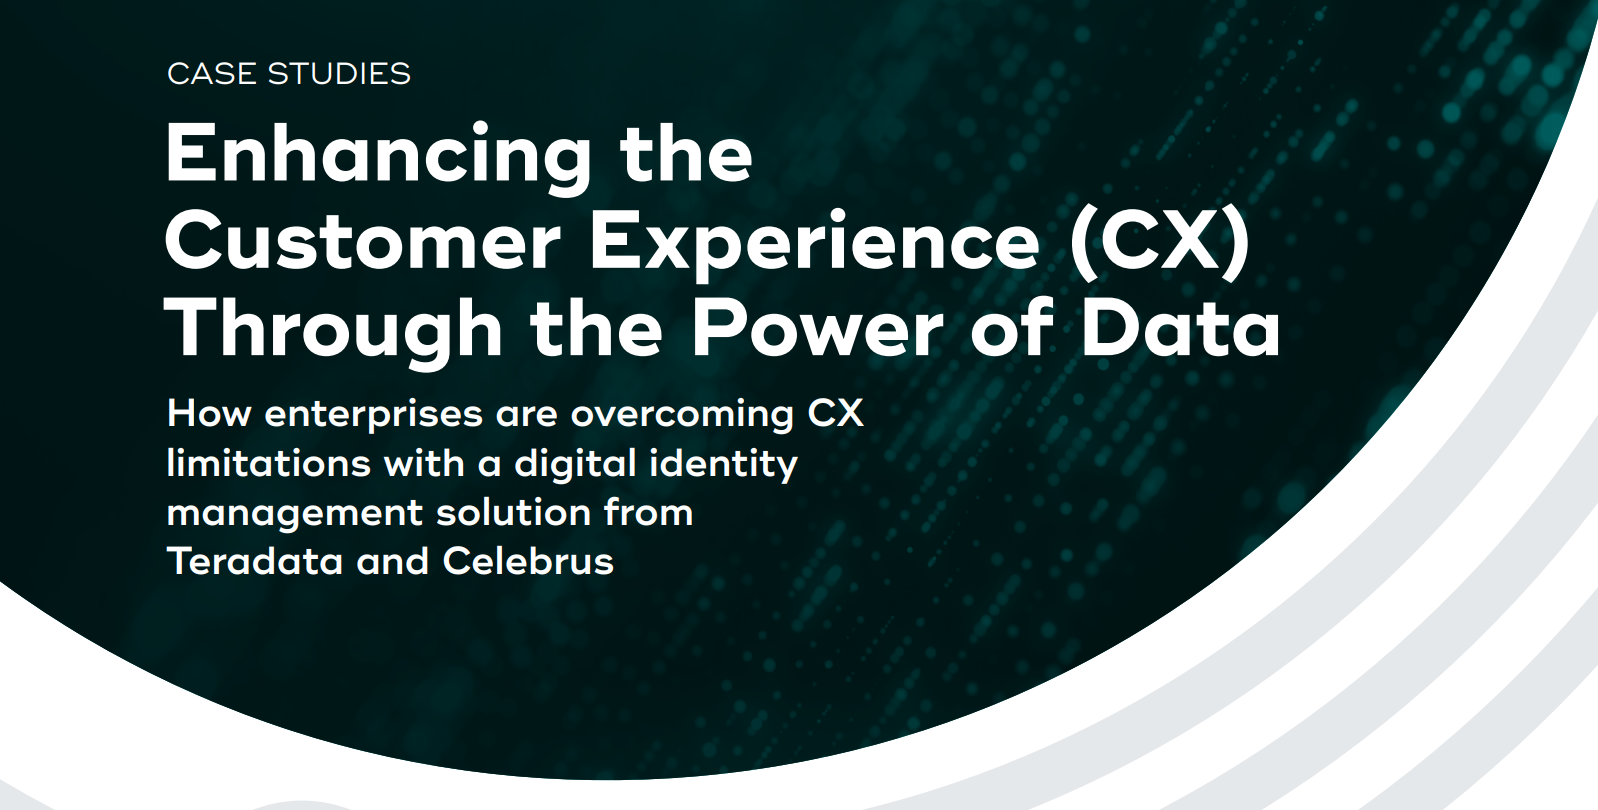 Case studies of overcoming CX limitations with Digital Identity Management